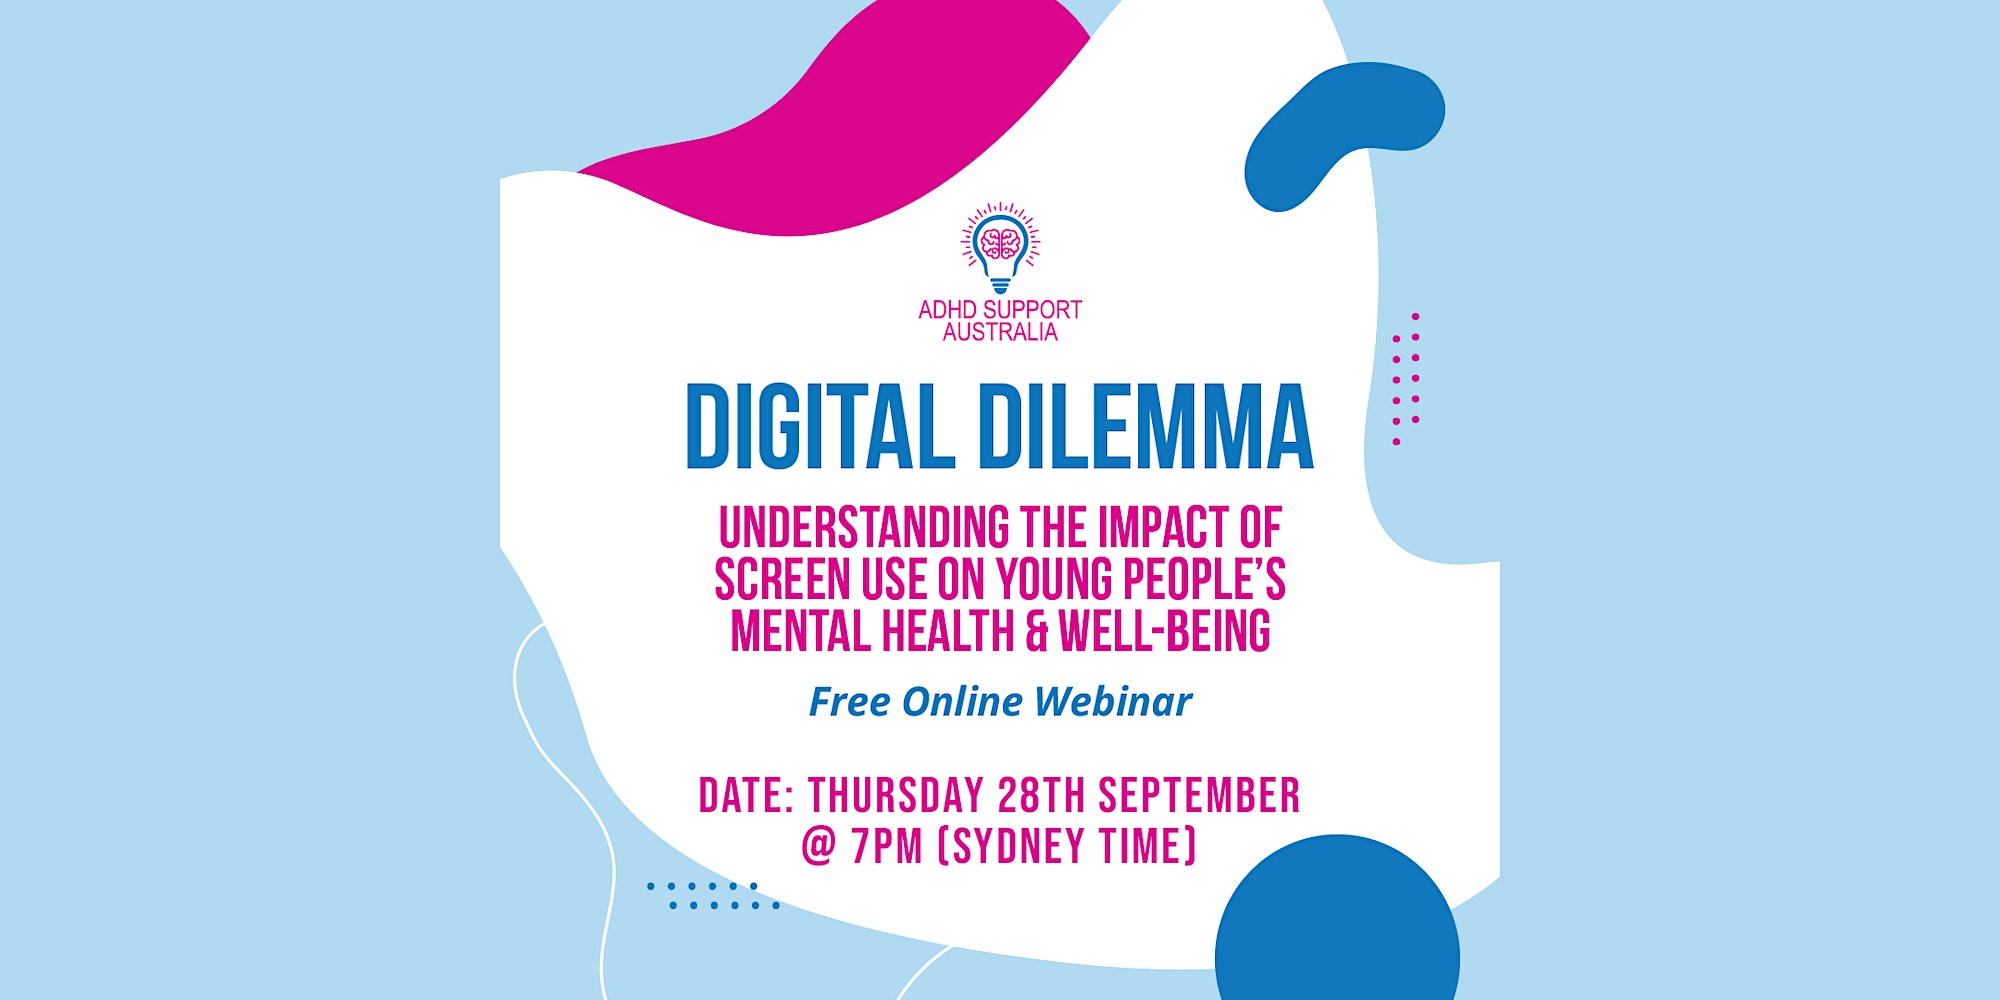 The Poster for Digital Dilemma Understanding the Impact of Screen Use on Young People's Mental Health and Well-Being. This will happen on September 28th Thursday, at 7PM (Sydney Time)